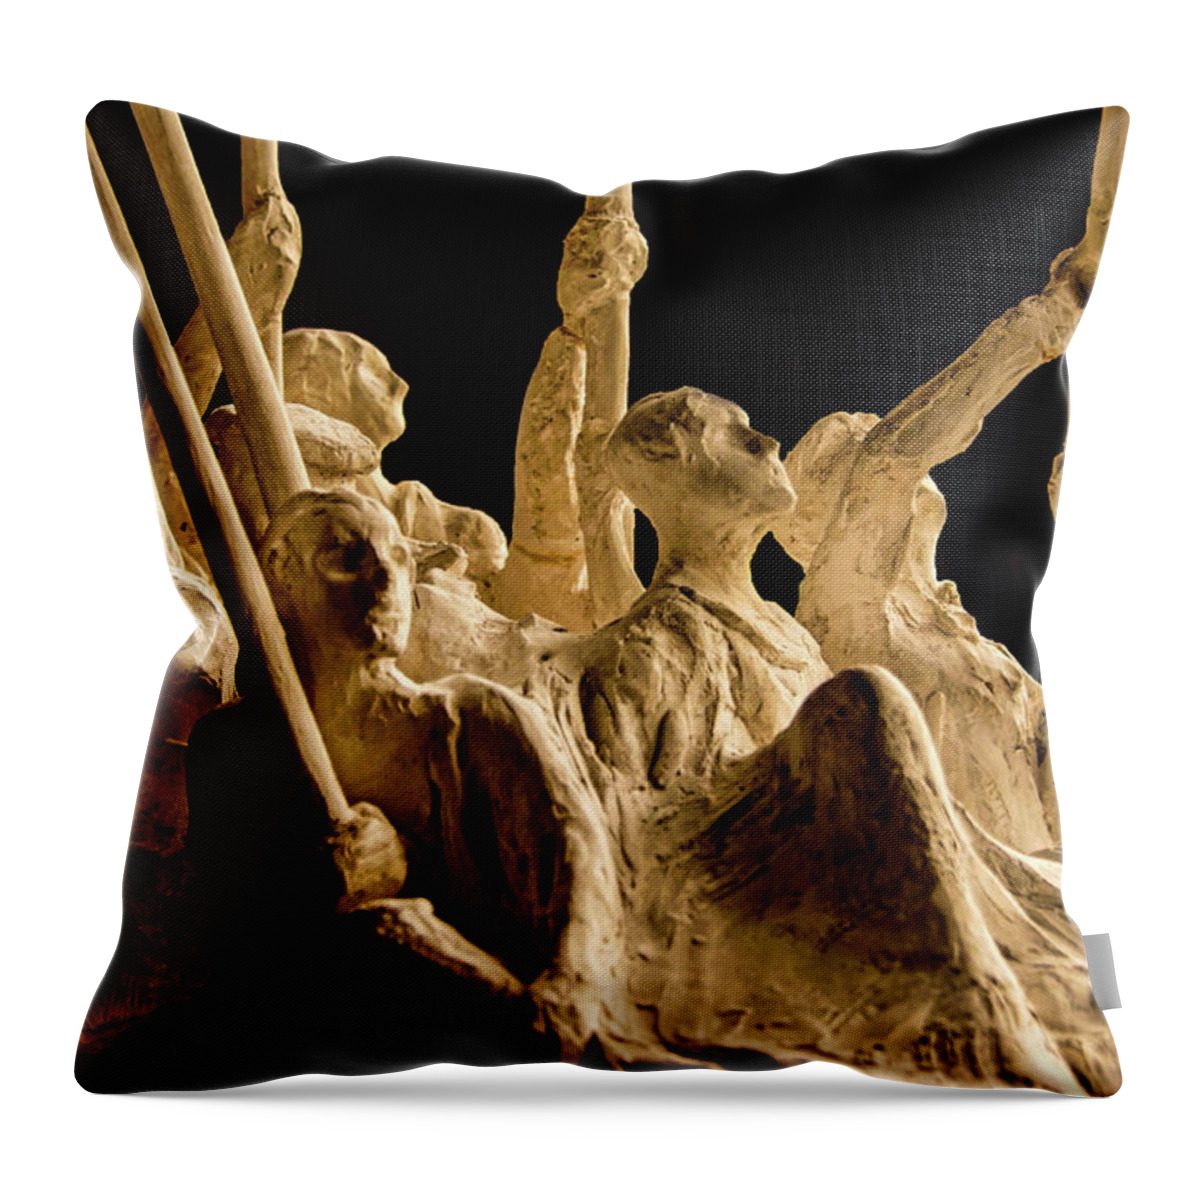 Rowing Boat Sculpture Sepia B&w Throw Pillow featuring the photograph Rowing Sculpture2 by John Linnemeyer